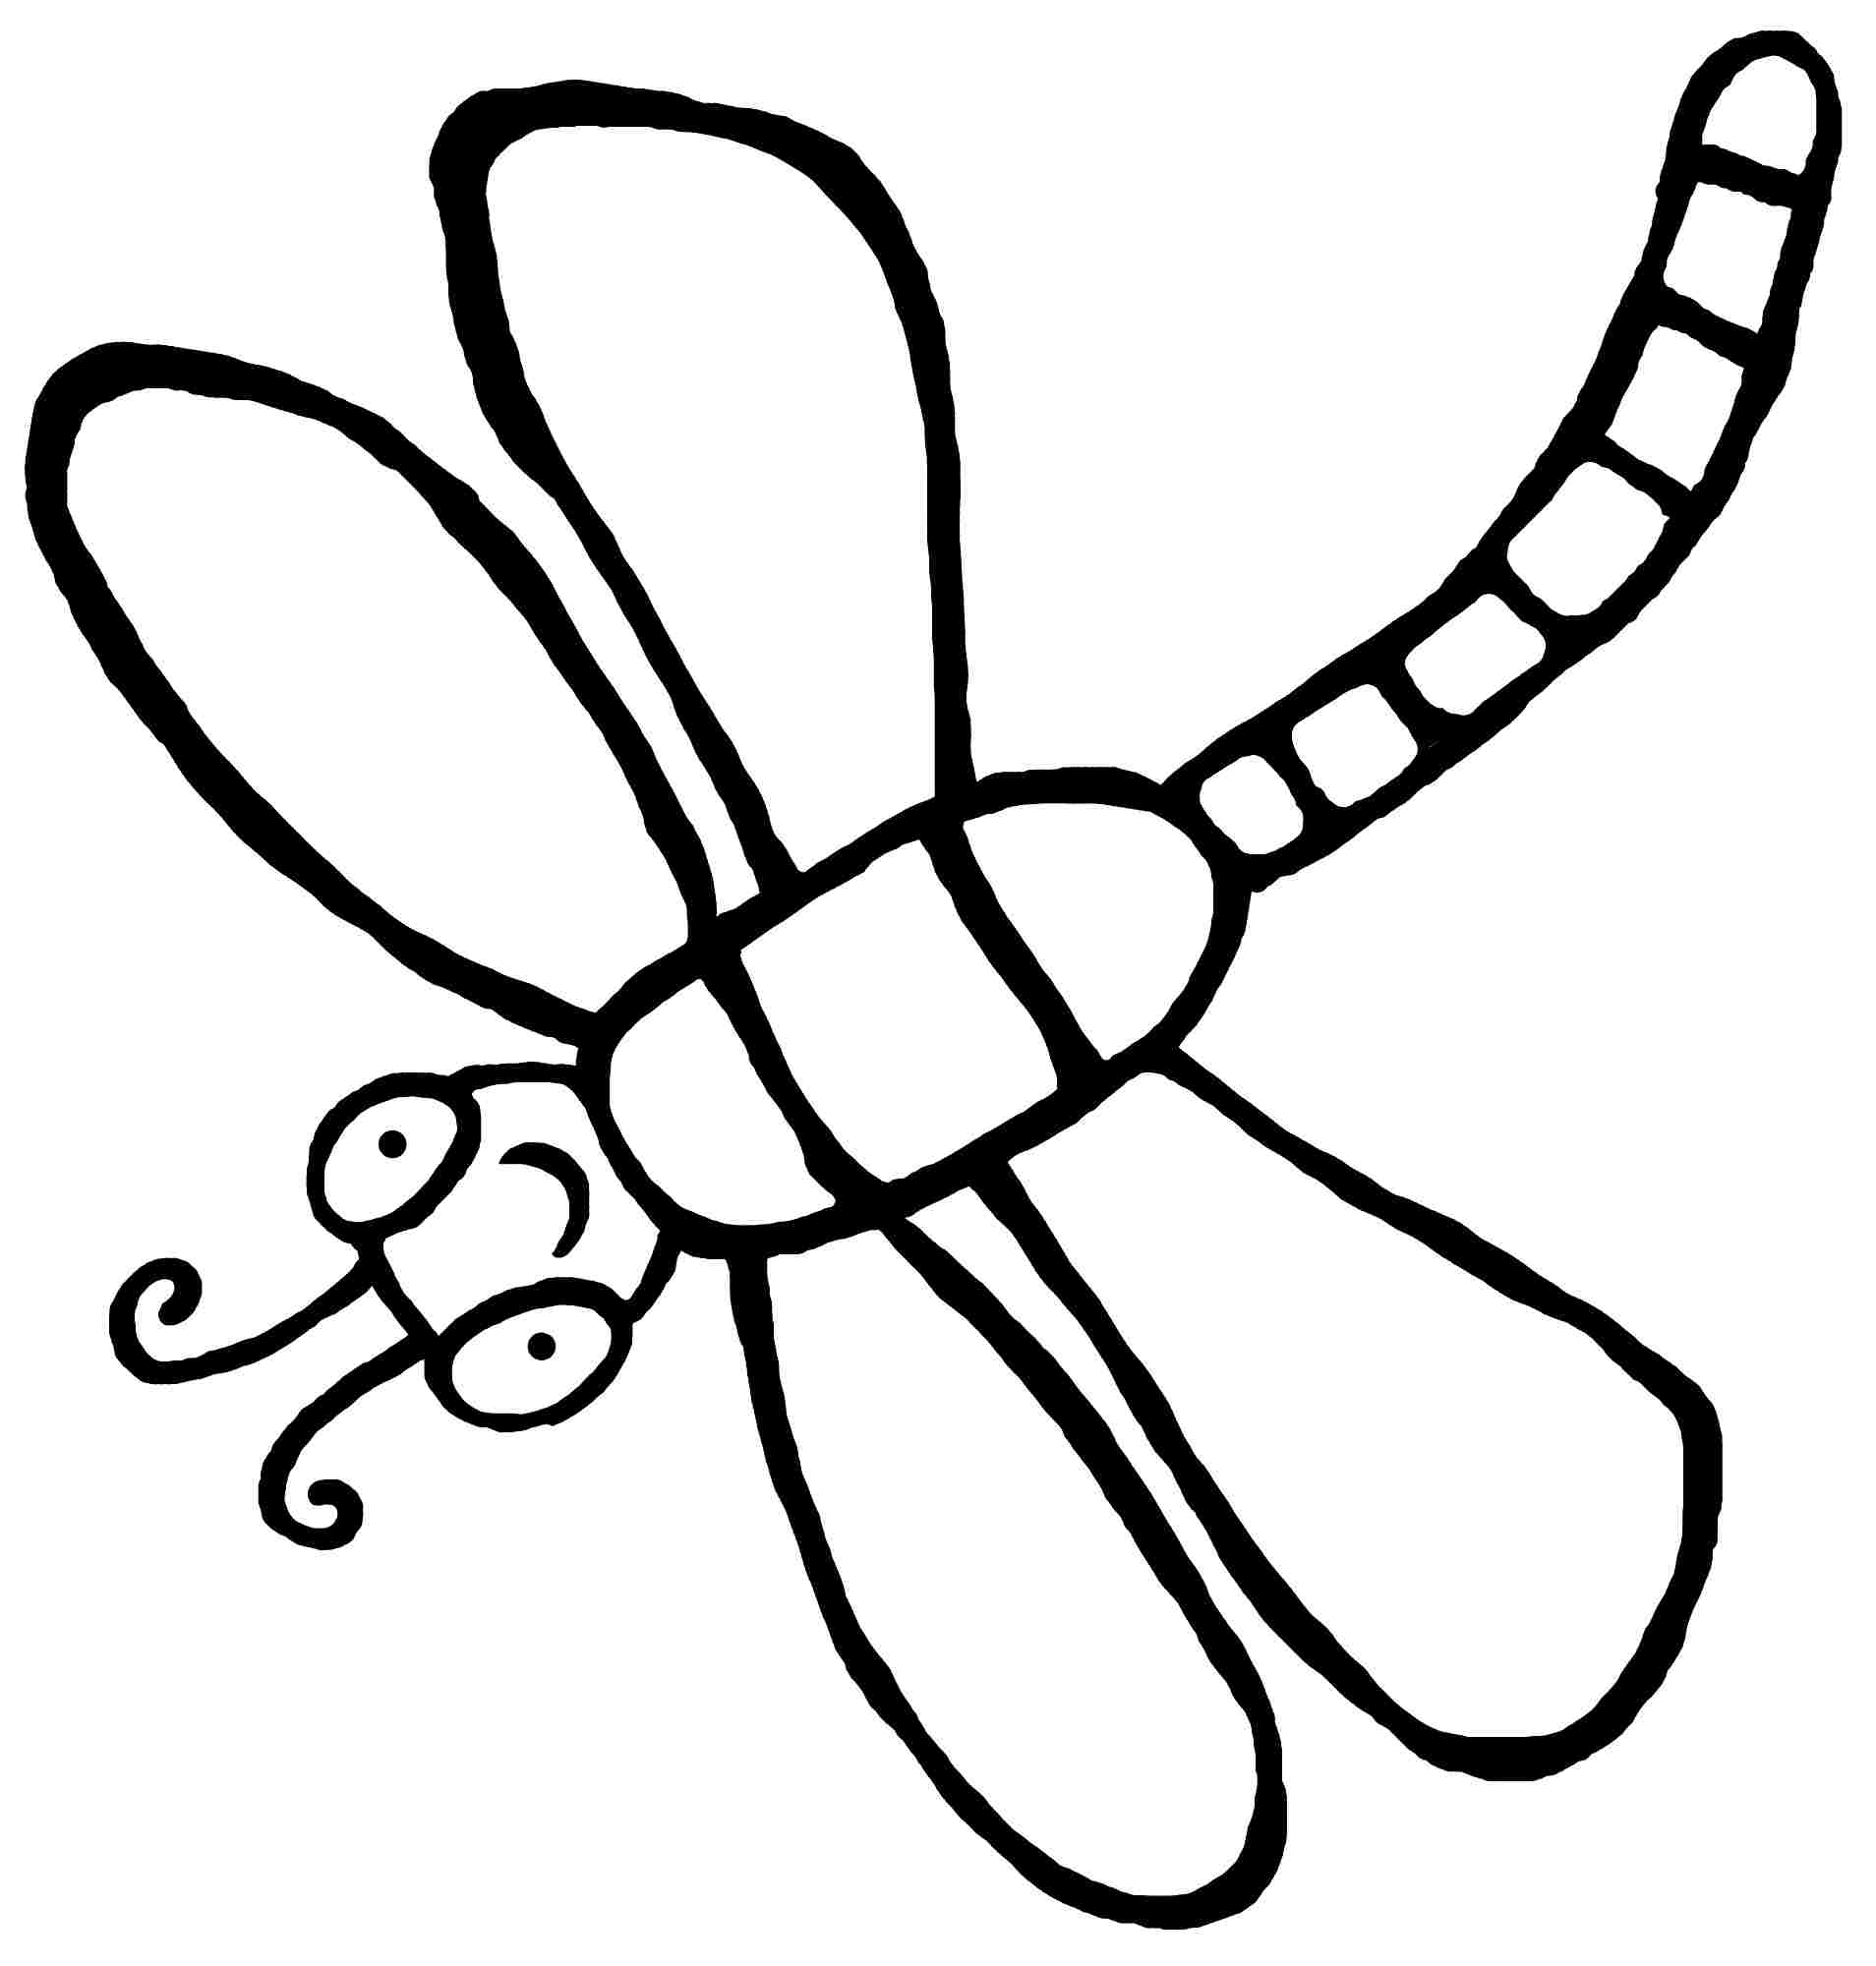 Download Dragonfly coloring for free - Designlooter 2020 👨‍🎨